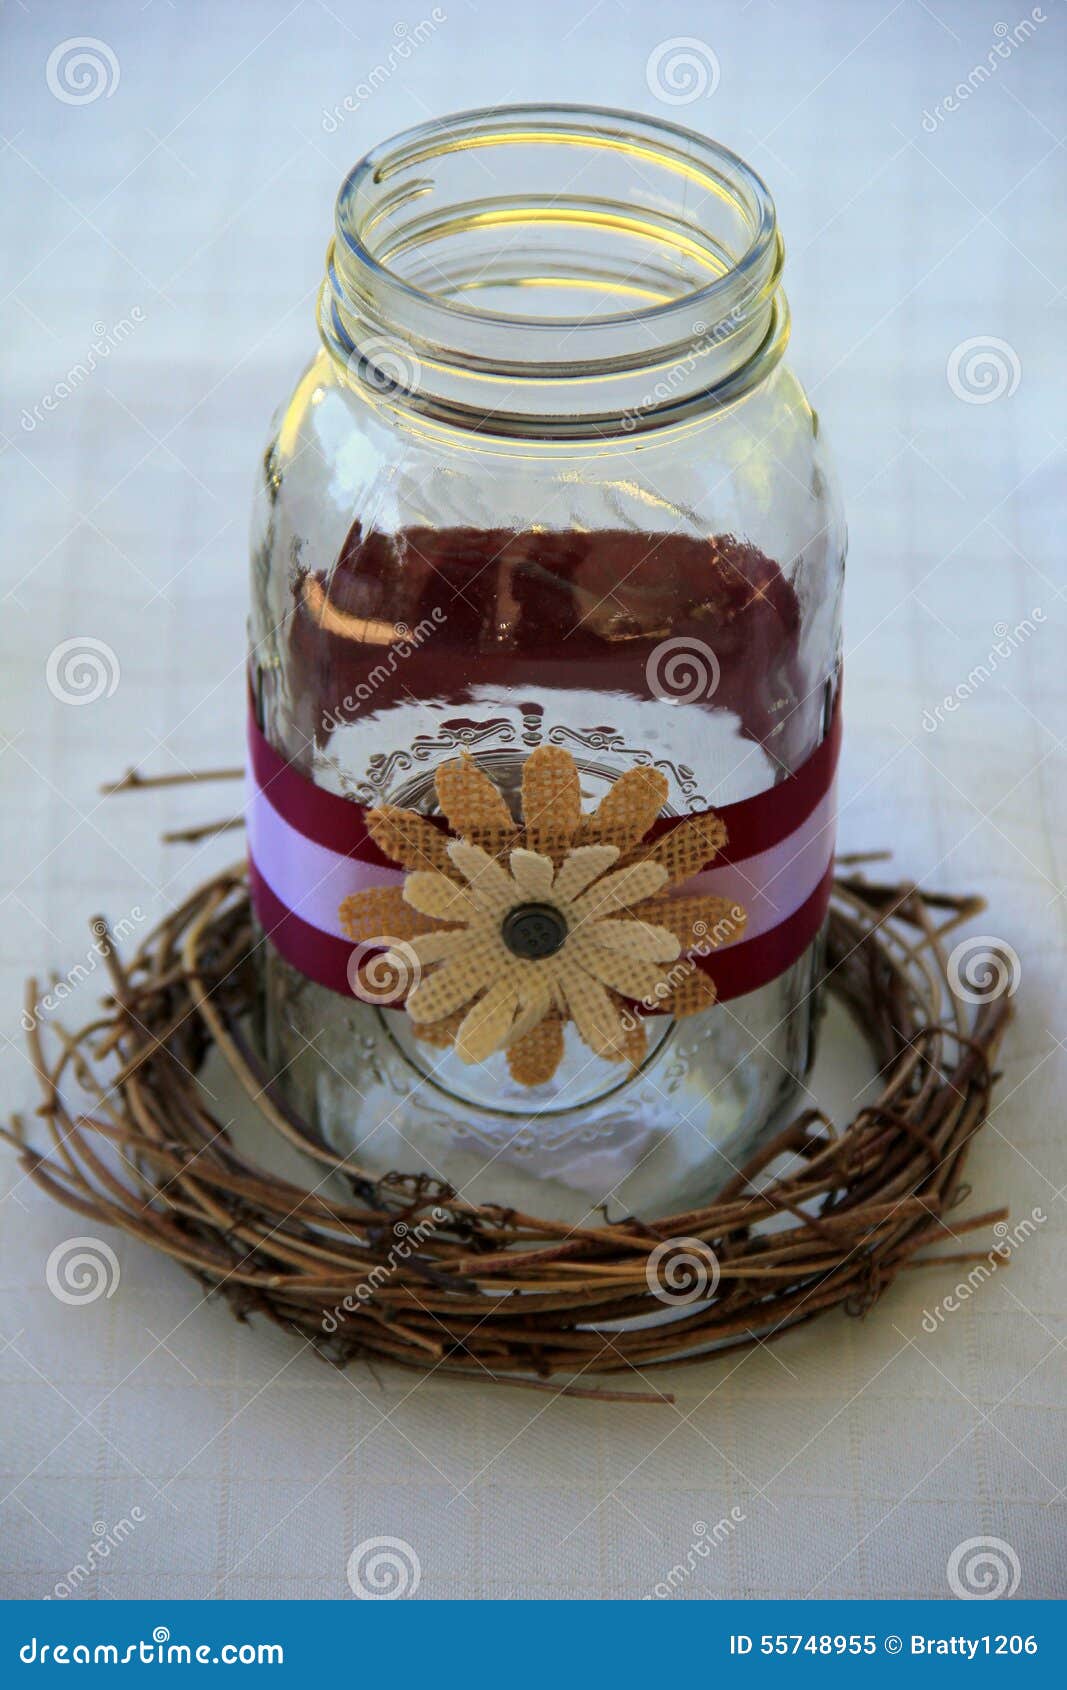 Pretty Mason Jar Decorated With Rustic Flowers And Ribbon